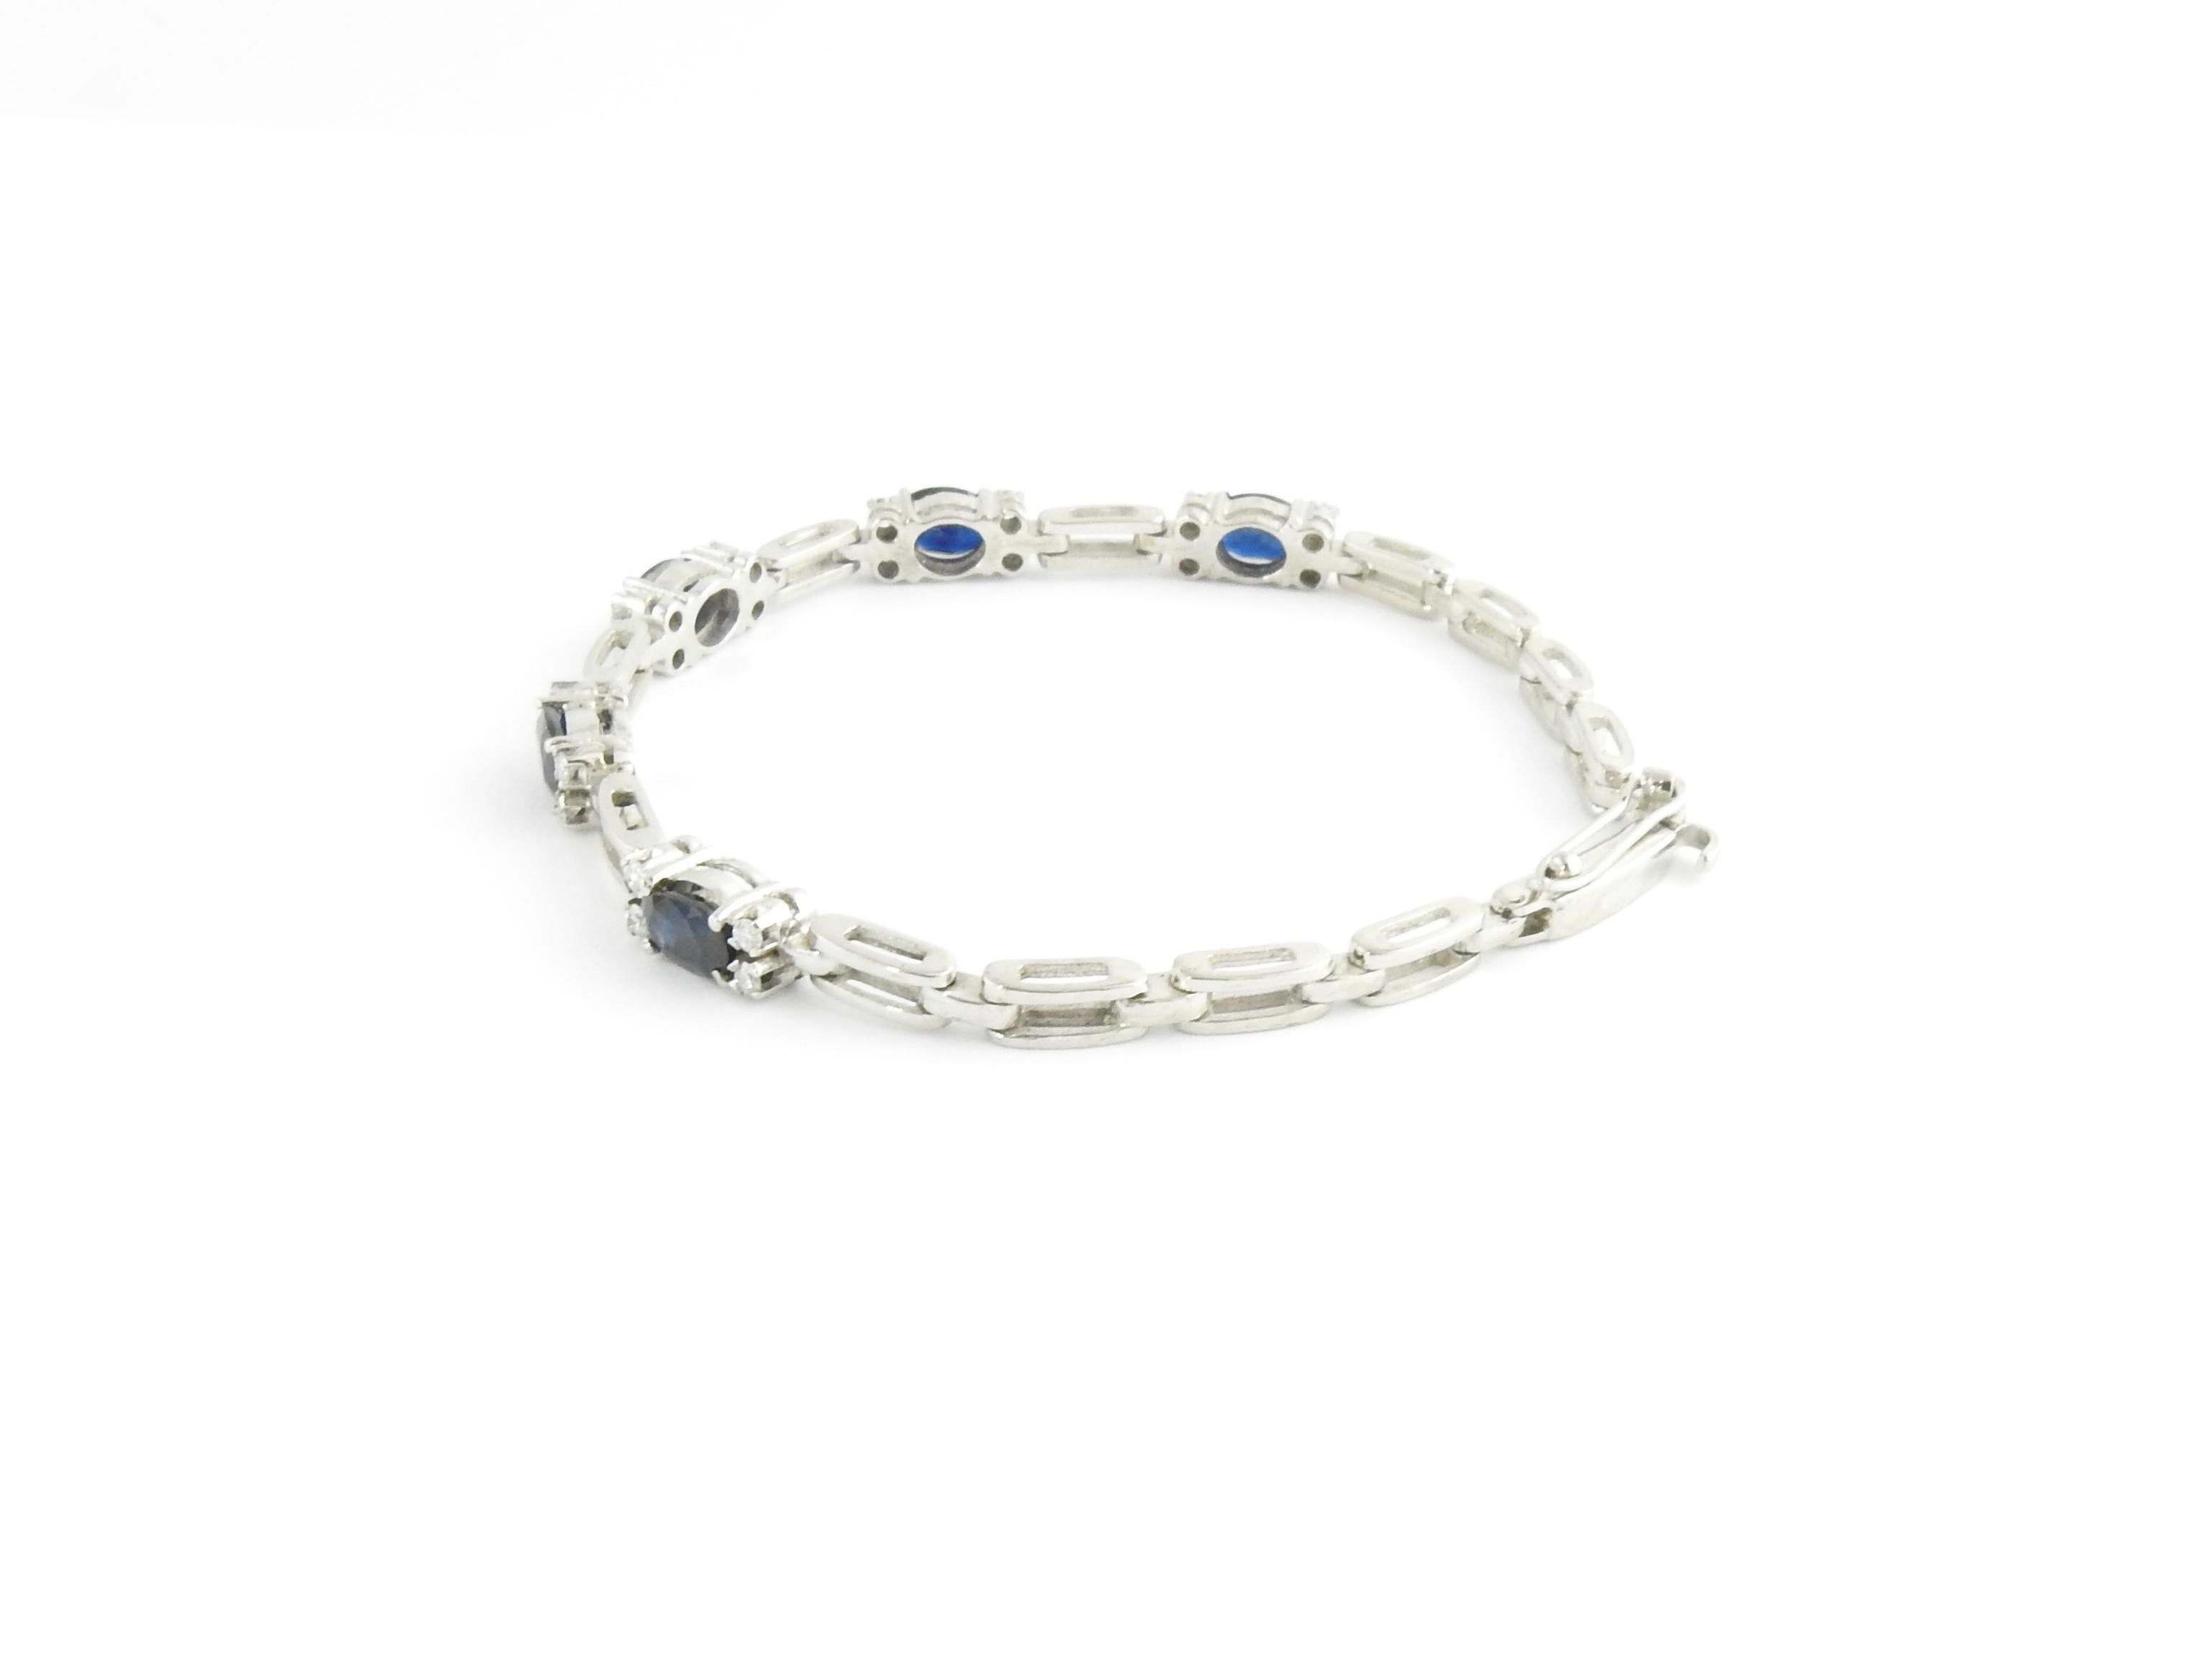 Vintage 18 Karat White Gold Sapphire and Diamond Bracelet-

This stunning bracelet features five oval sapphires* (7 mm x 5 mm each) and 20 round brilliant cut diamonds set in beautifully detailed 18K white gold.  Width:  5 mm.
*Some chips noted not